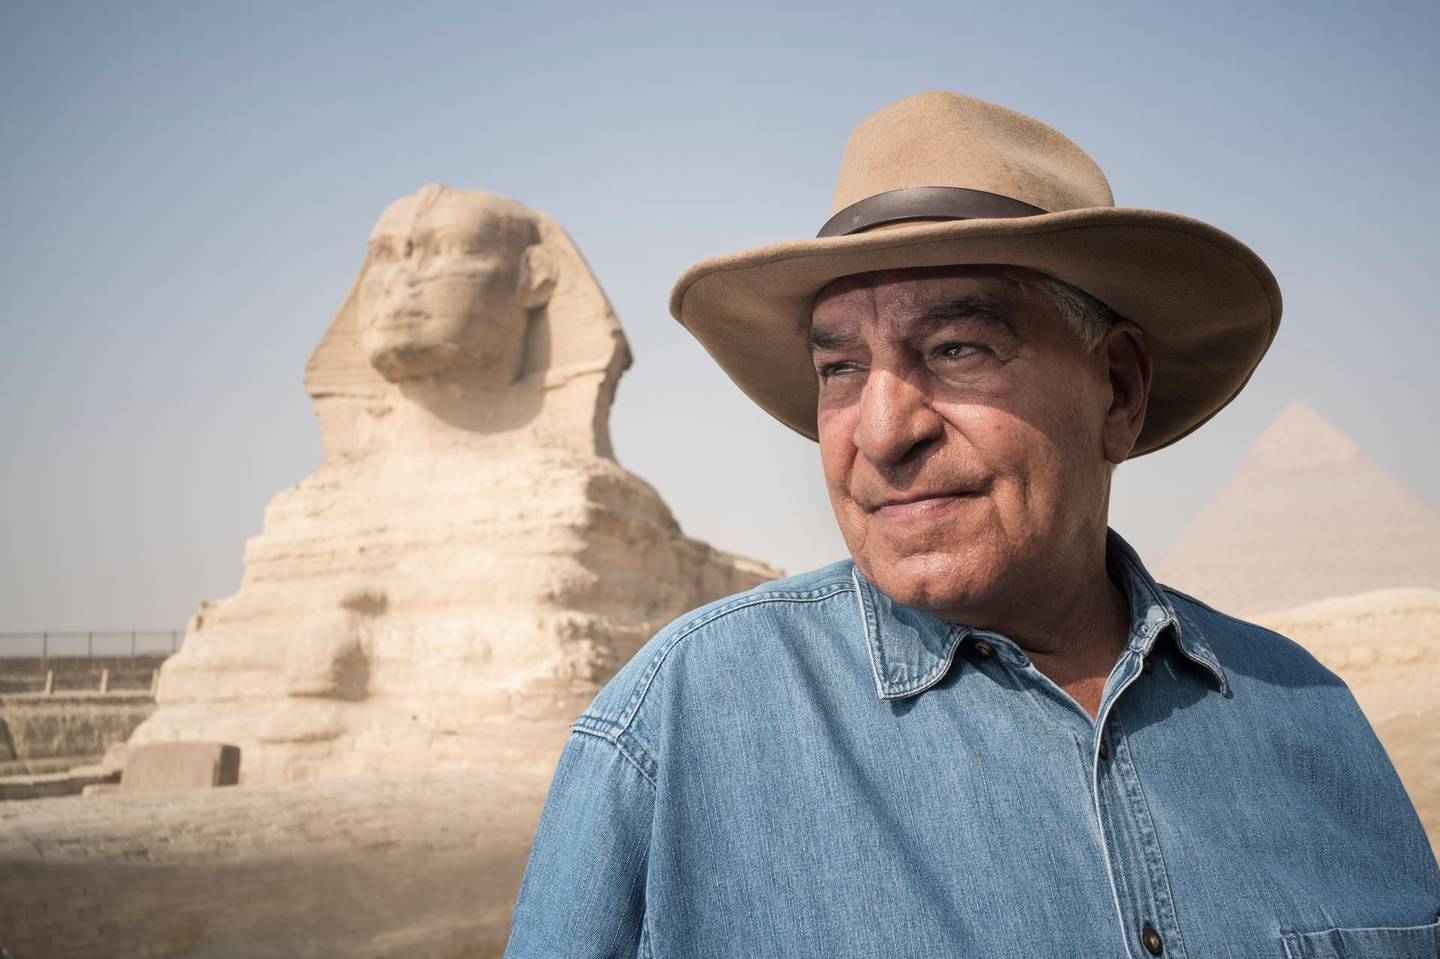 CAIRO, EGYPT - September 20: Portrait of Dr. Zahi Hawass in front of the Sphinx and Pyramids of Giza on September 20, 2016 in  Cairo,  Egypt. Zahi Hawass is an Egyptian archaeologist, an Egyptologist, and former Minister of State for Antiquities Affairs. He has also worked at archaeological sites in the Nile Delta, the Western Desert, and the Upper Nile Valley. (Photo by David Degner/Getty Images)